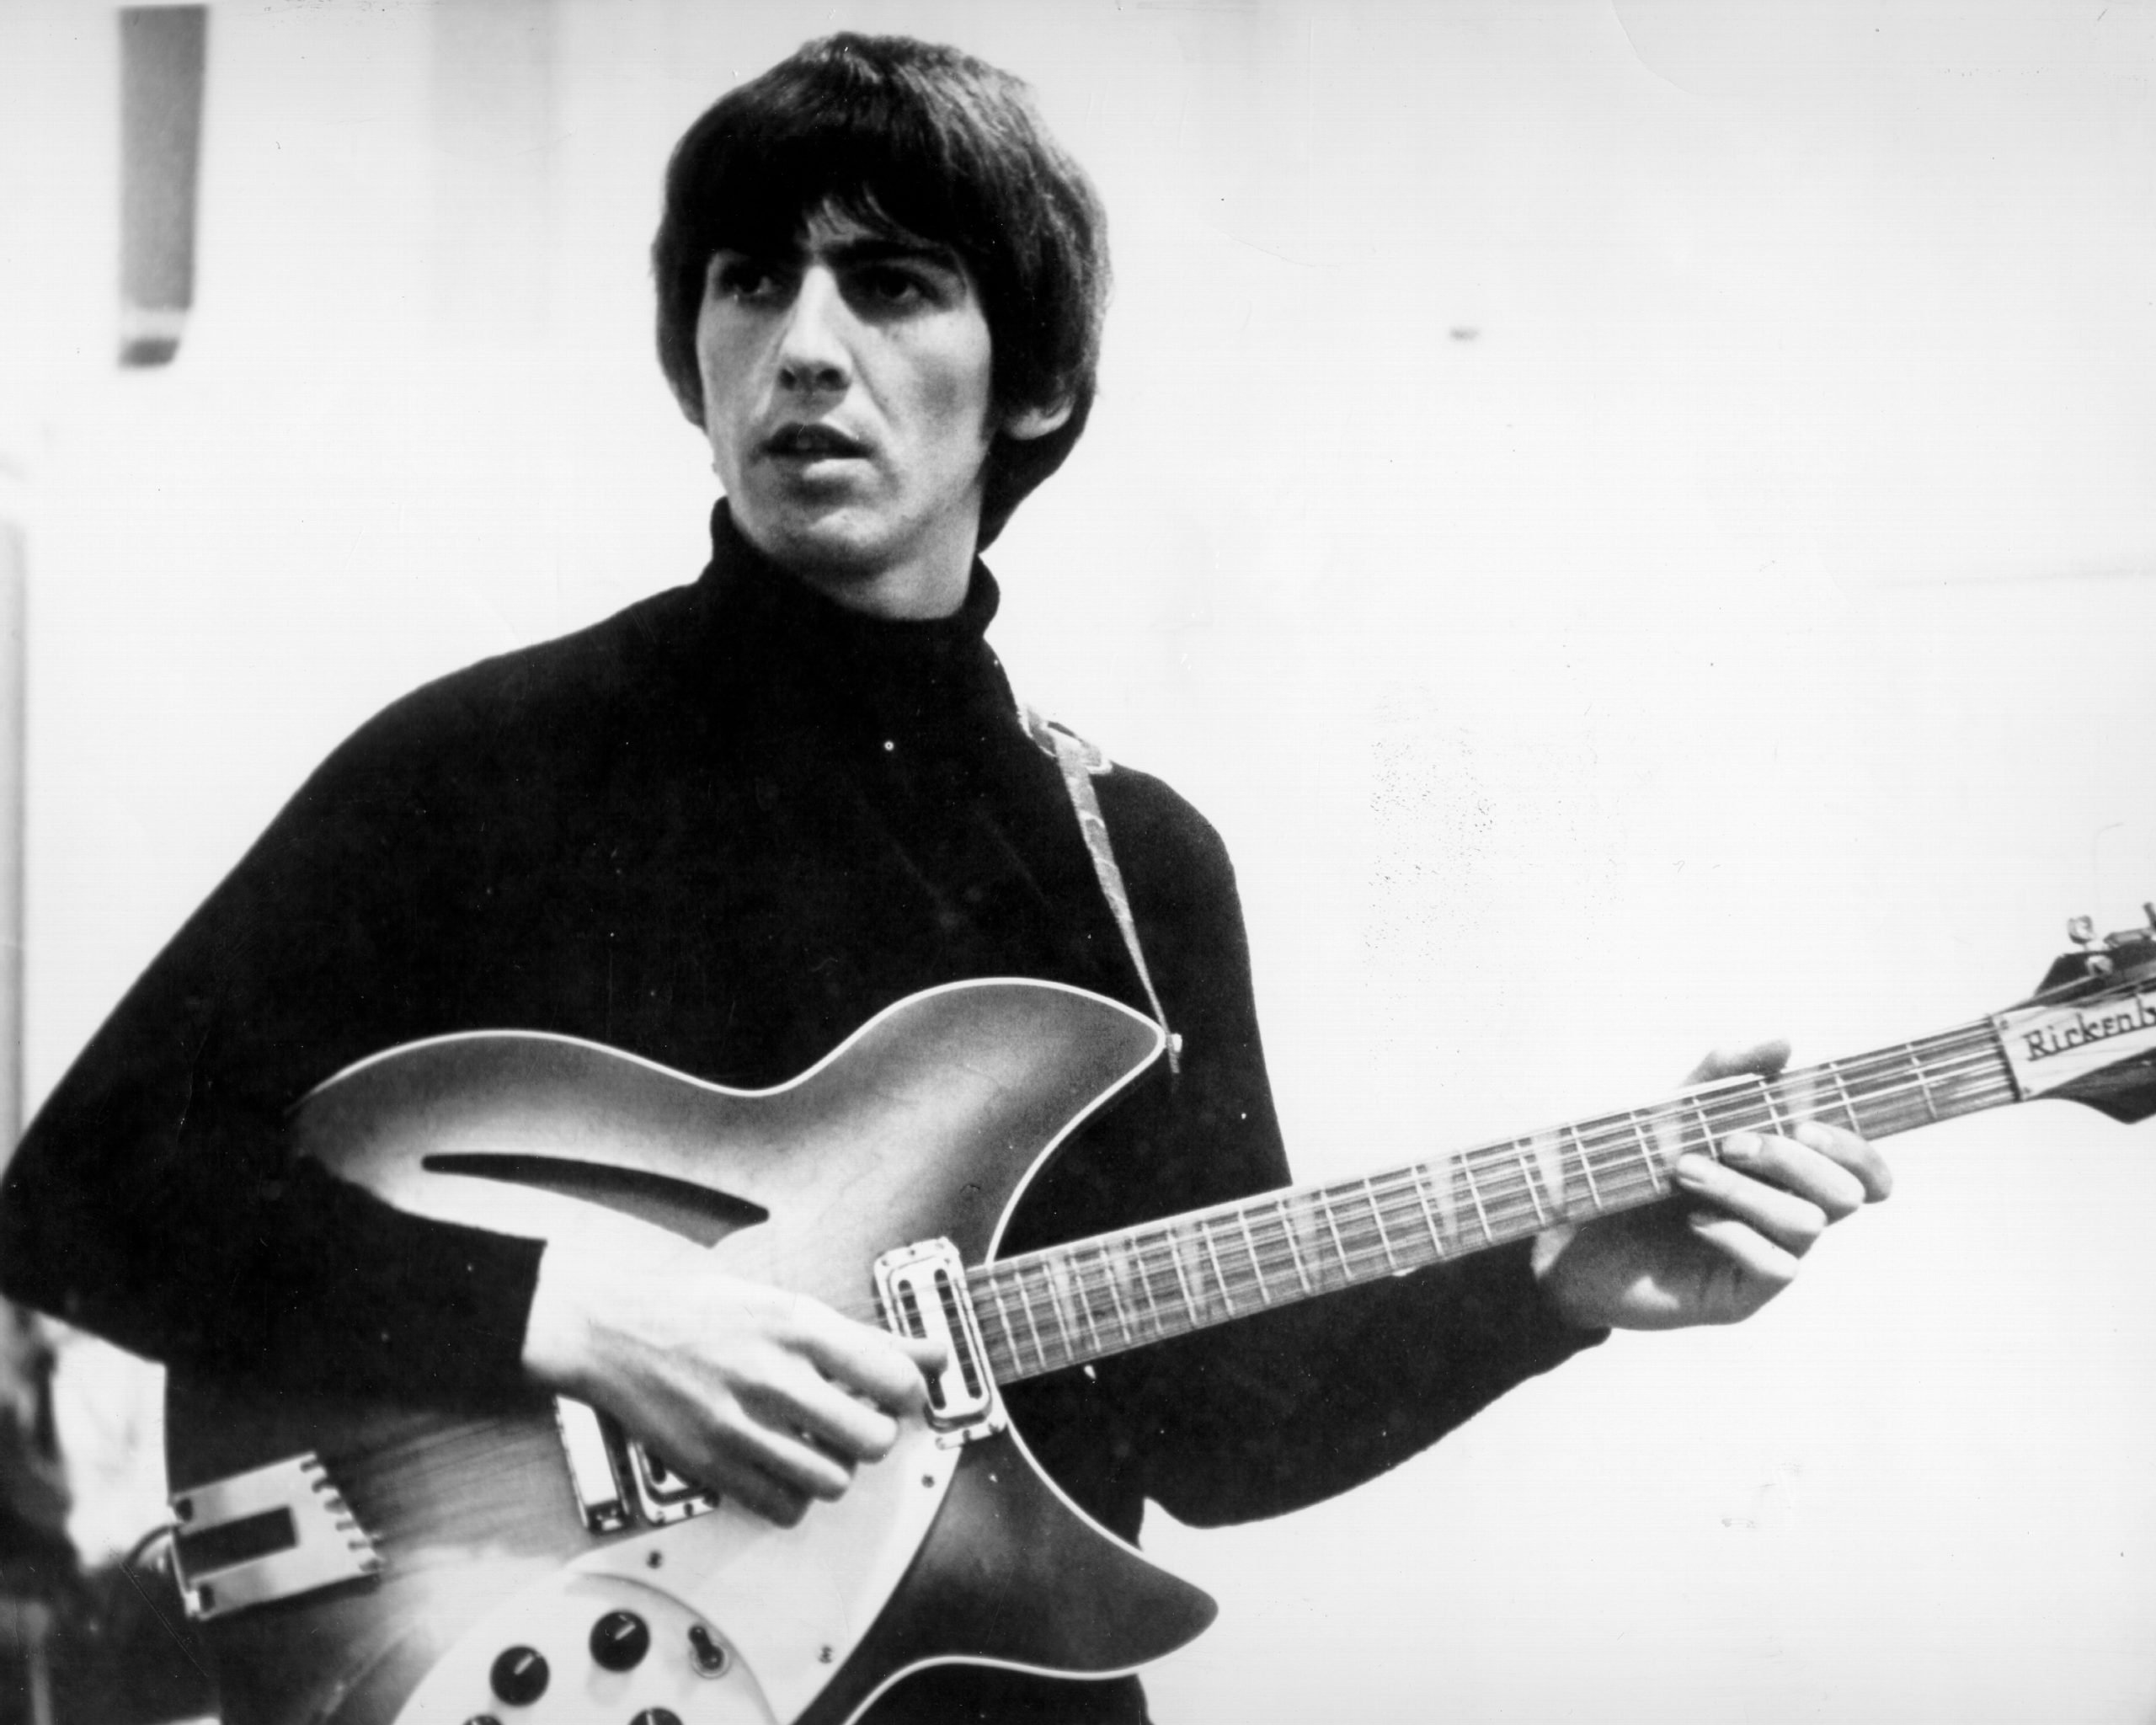 The Beatles' George Harrison holding a guitar during the "Eleanor Rigby" era